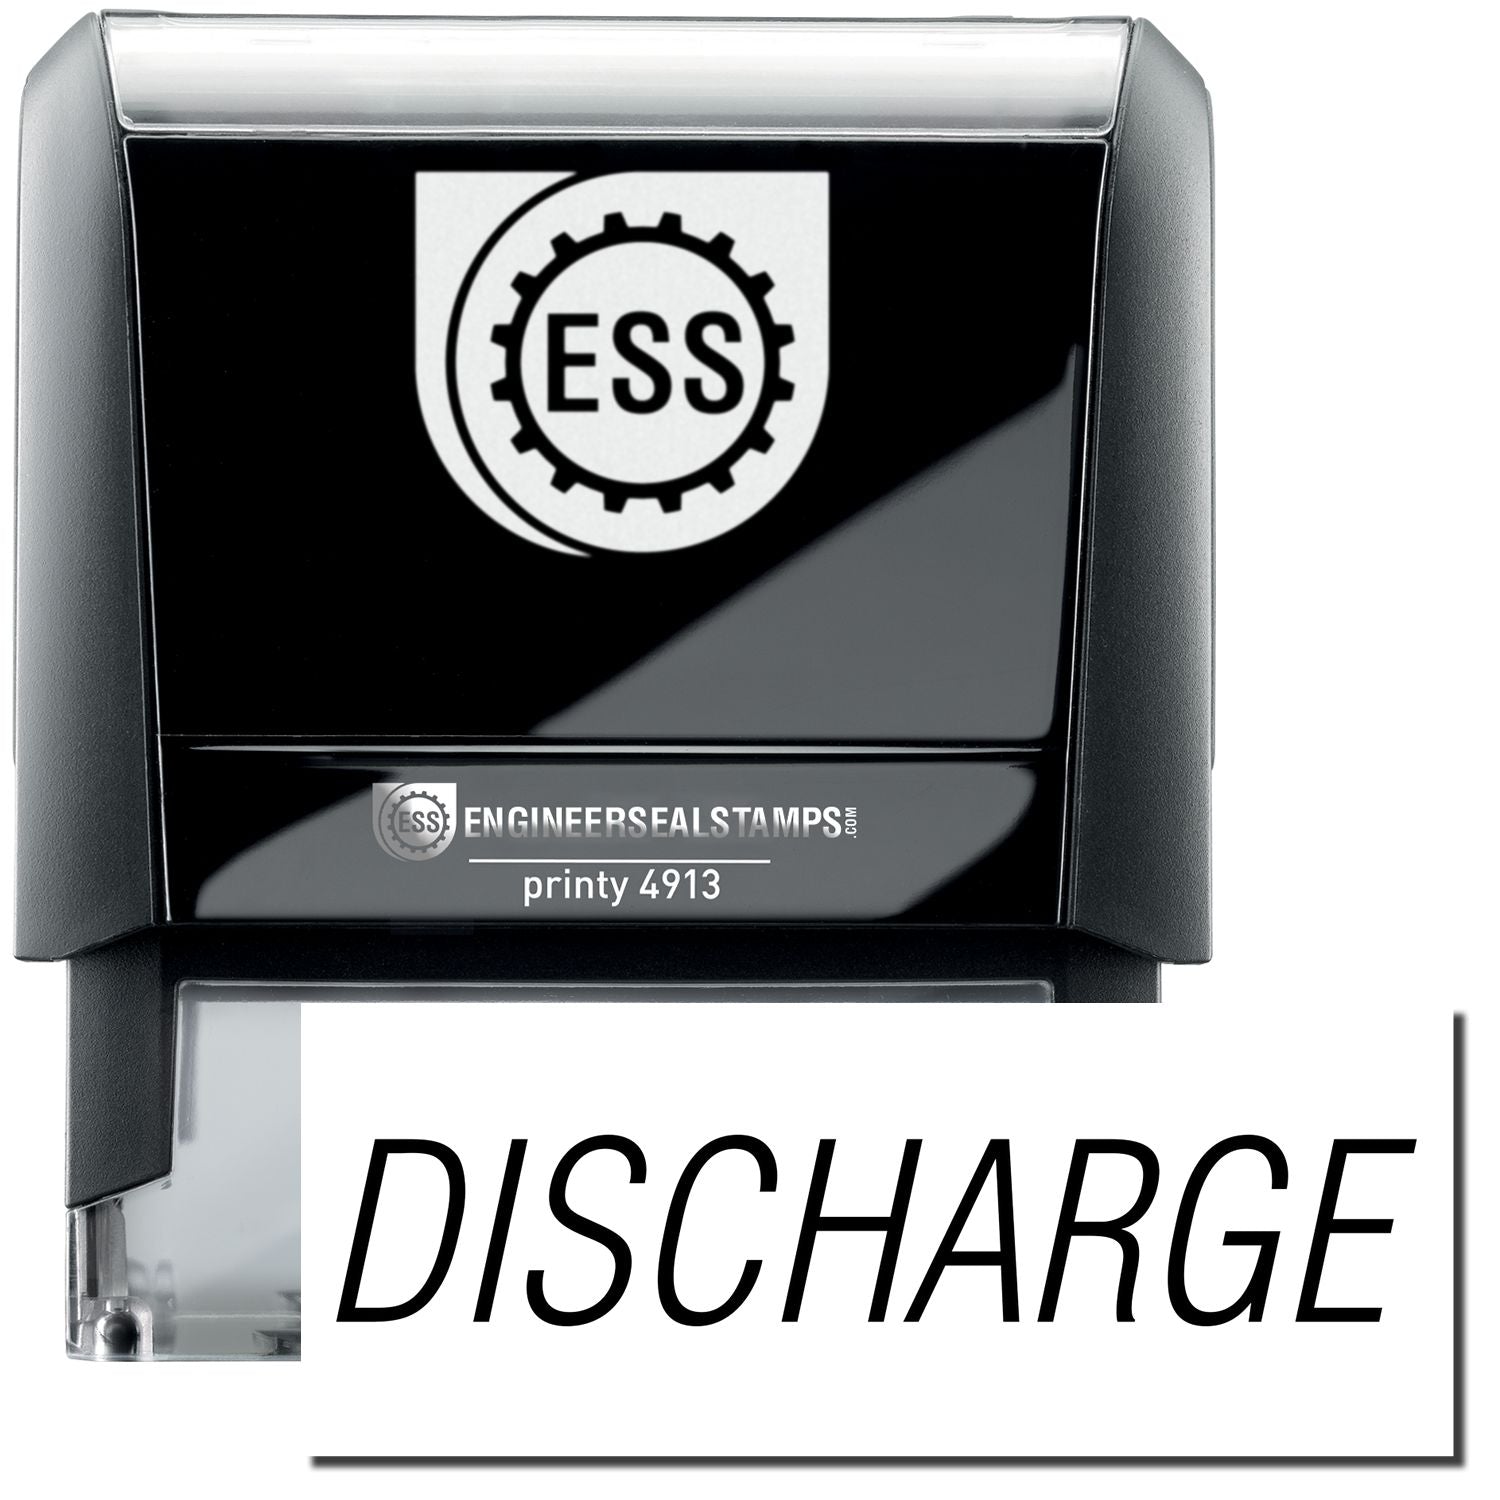 A self-inking stamp with a stamped image showing how the text "DISCHARGE" in a large italic font is displayed by it.